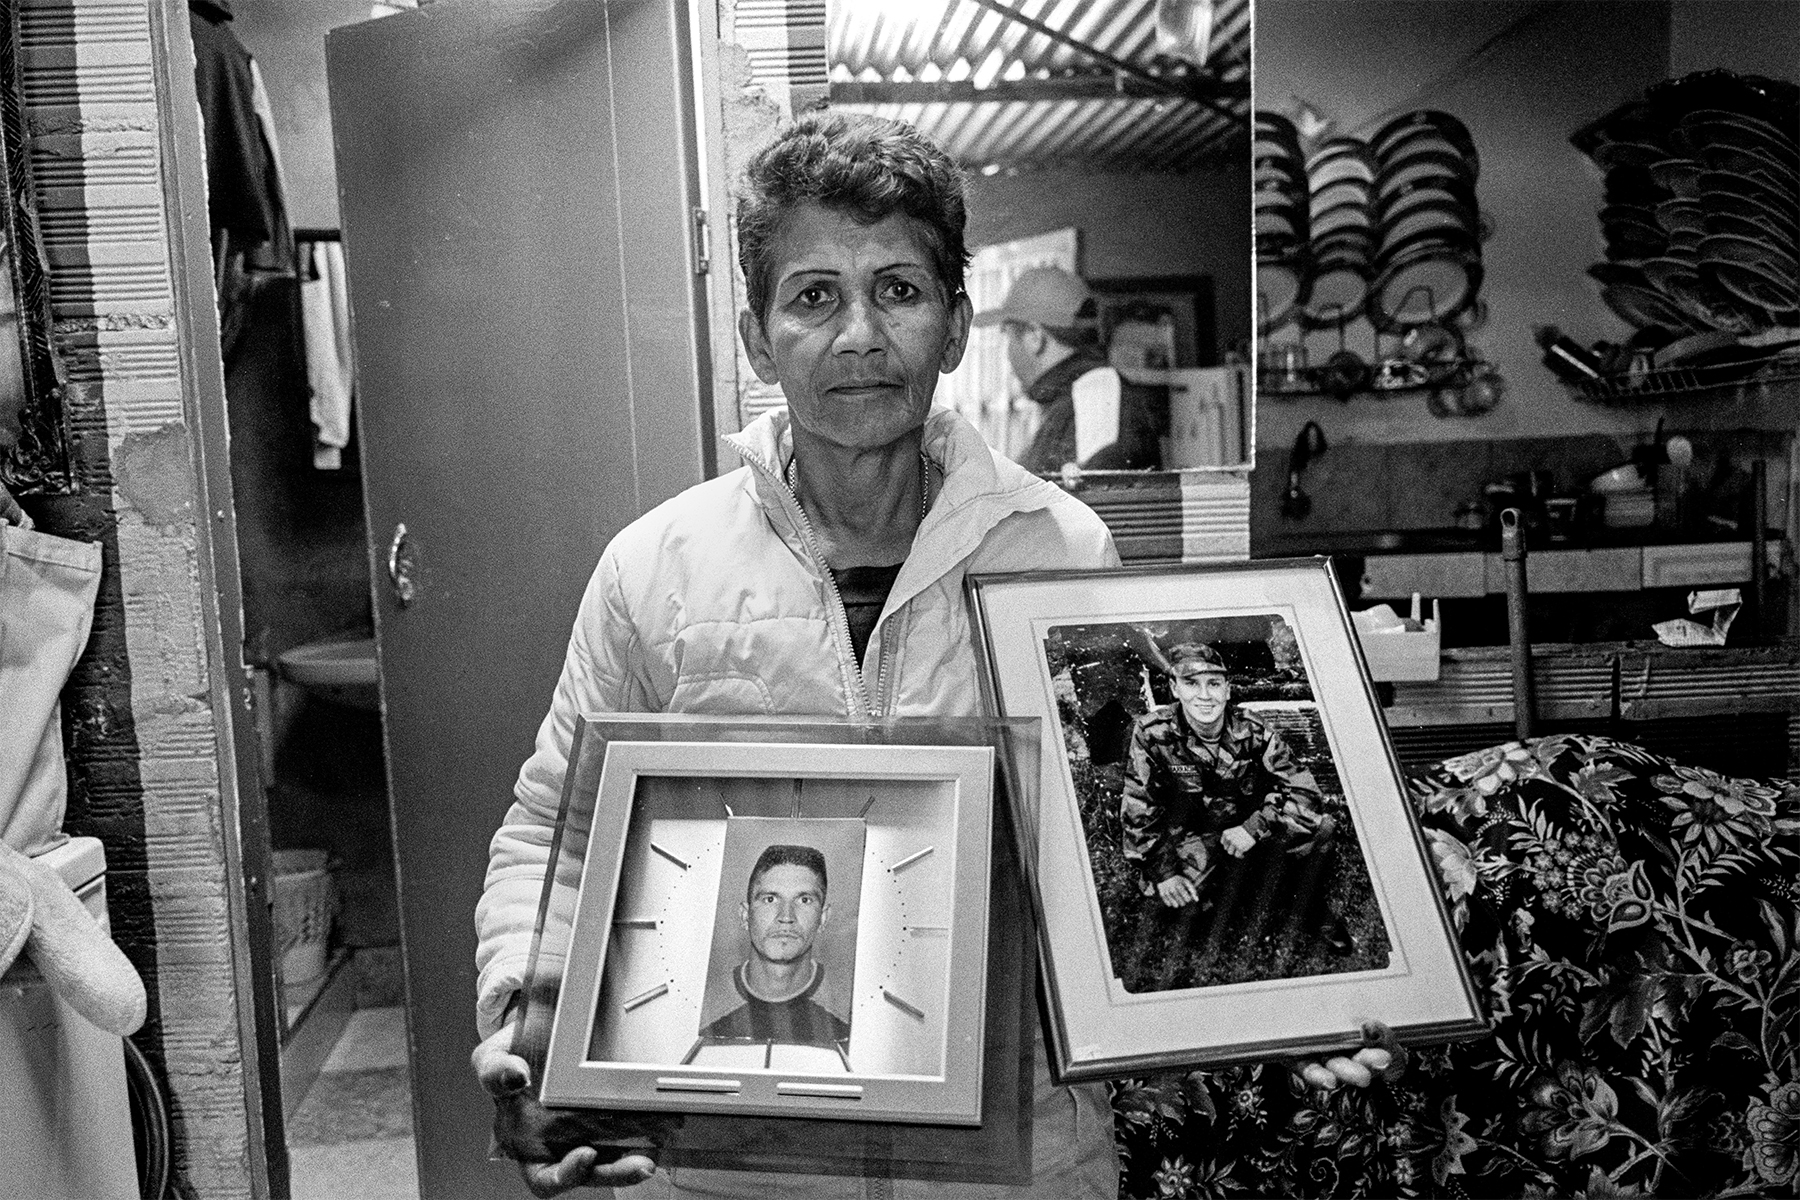  Nieve lost both her sons to the violence in the barrios. 3 years ago,&nbsp;one of her sons, Javier was stabbed to death a block away from home one night for a 5 dollar dept. Vladimir was also killed in the neighbourhood 